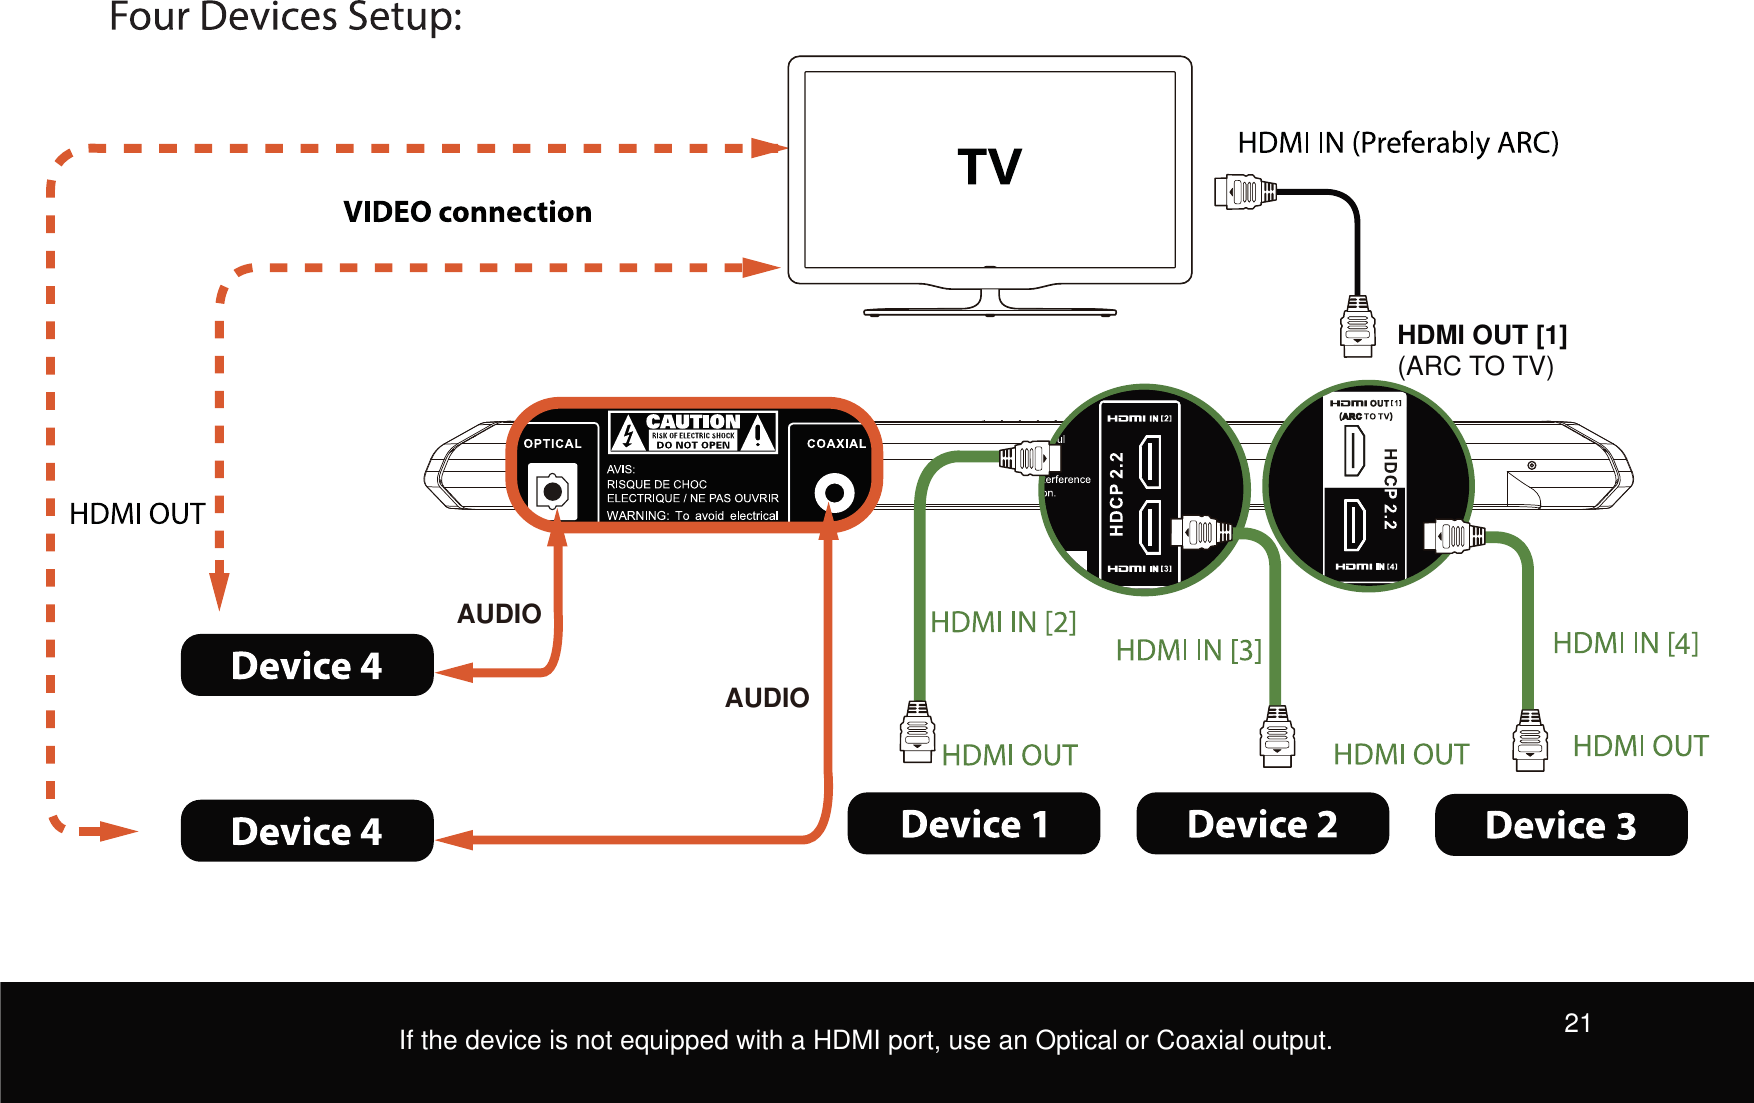 HDMI OUT [1] (ARC TO TV)4AUDIOAUDIOIf the device is not equipped with a HDMI port, use an Optical or Coaxial output. 21